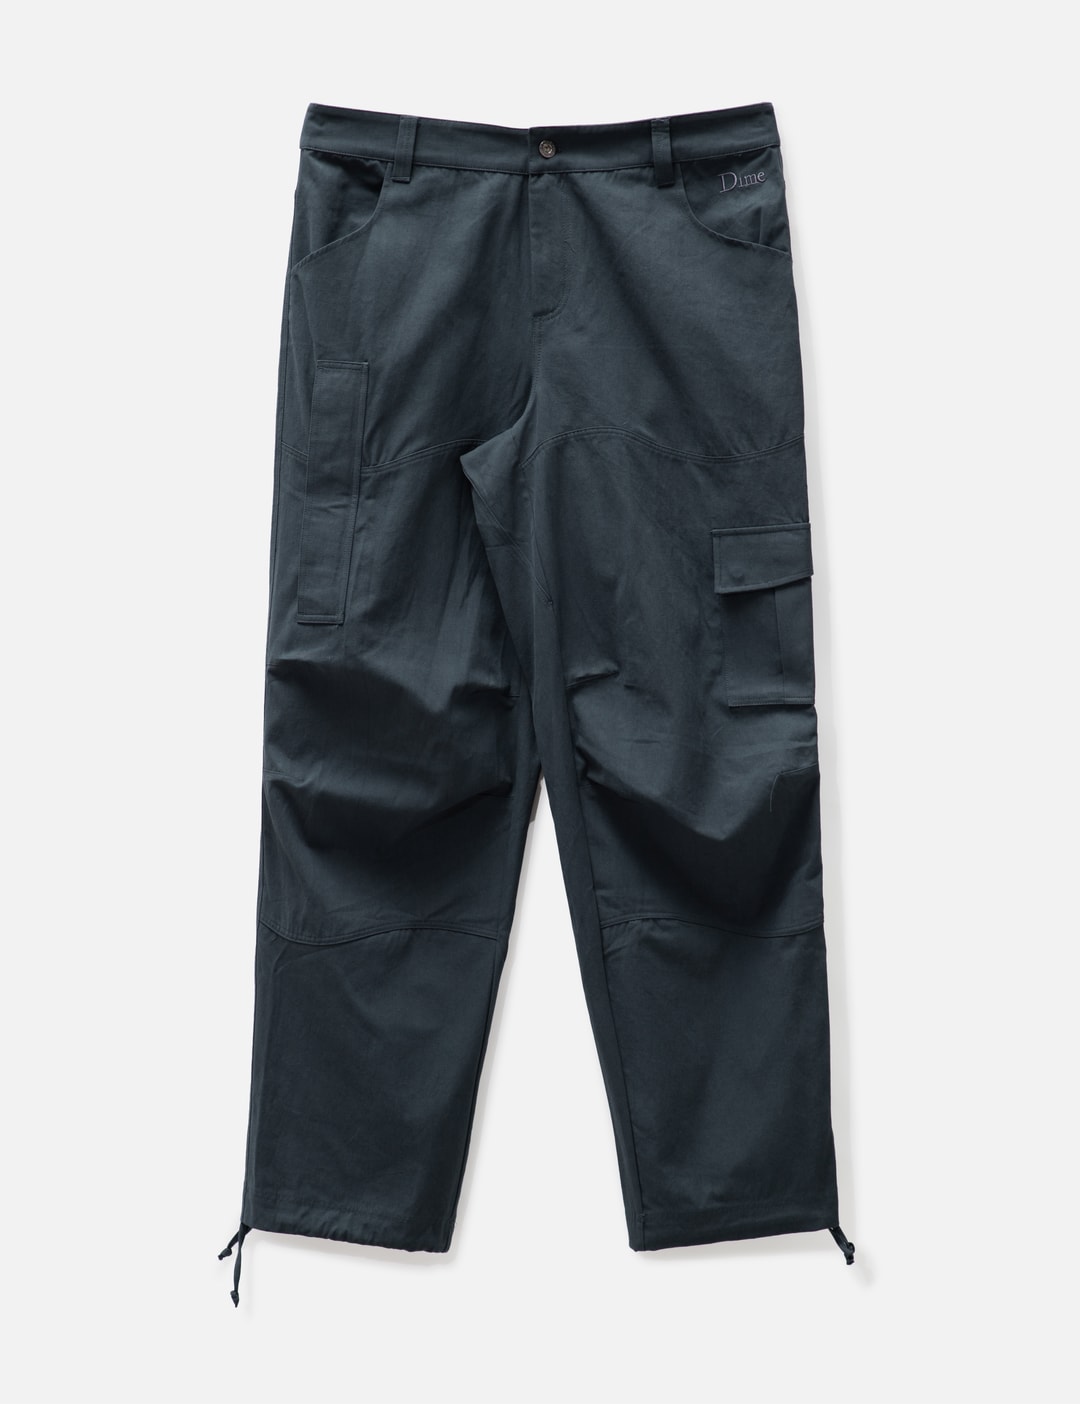 Dime - Jurassic Cargo Pants | HBX - Globally Curated Fashion and ...